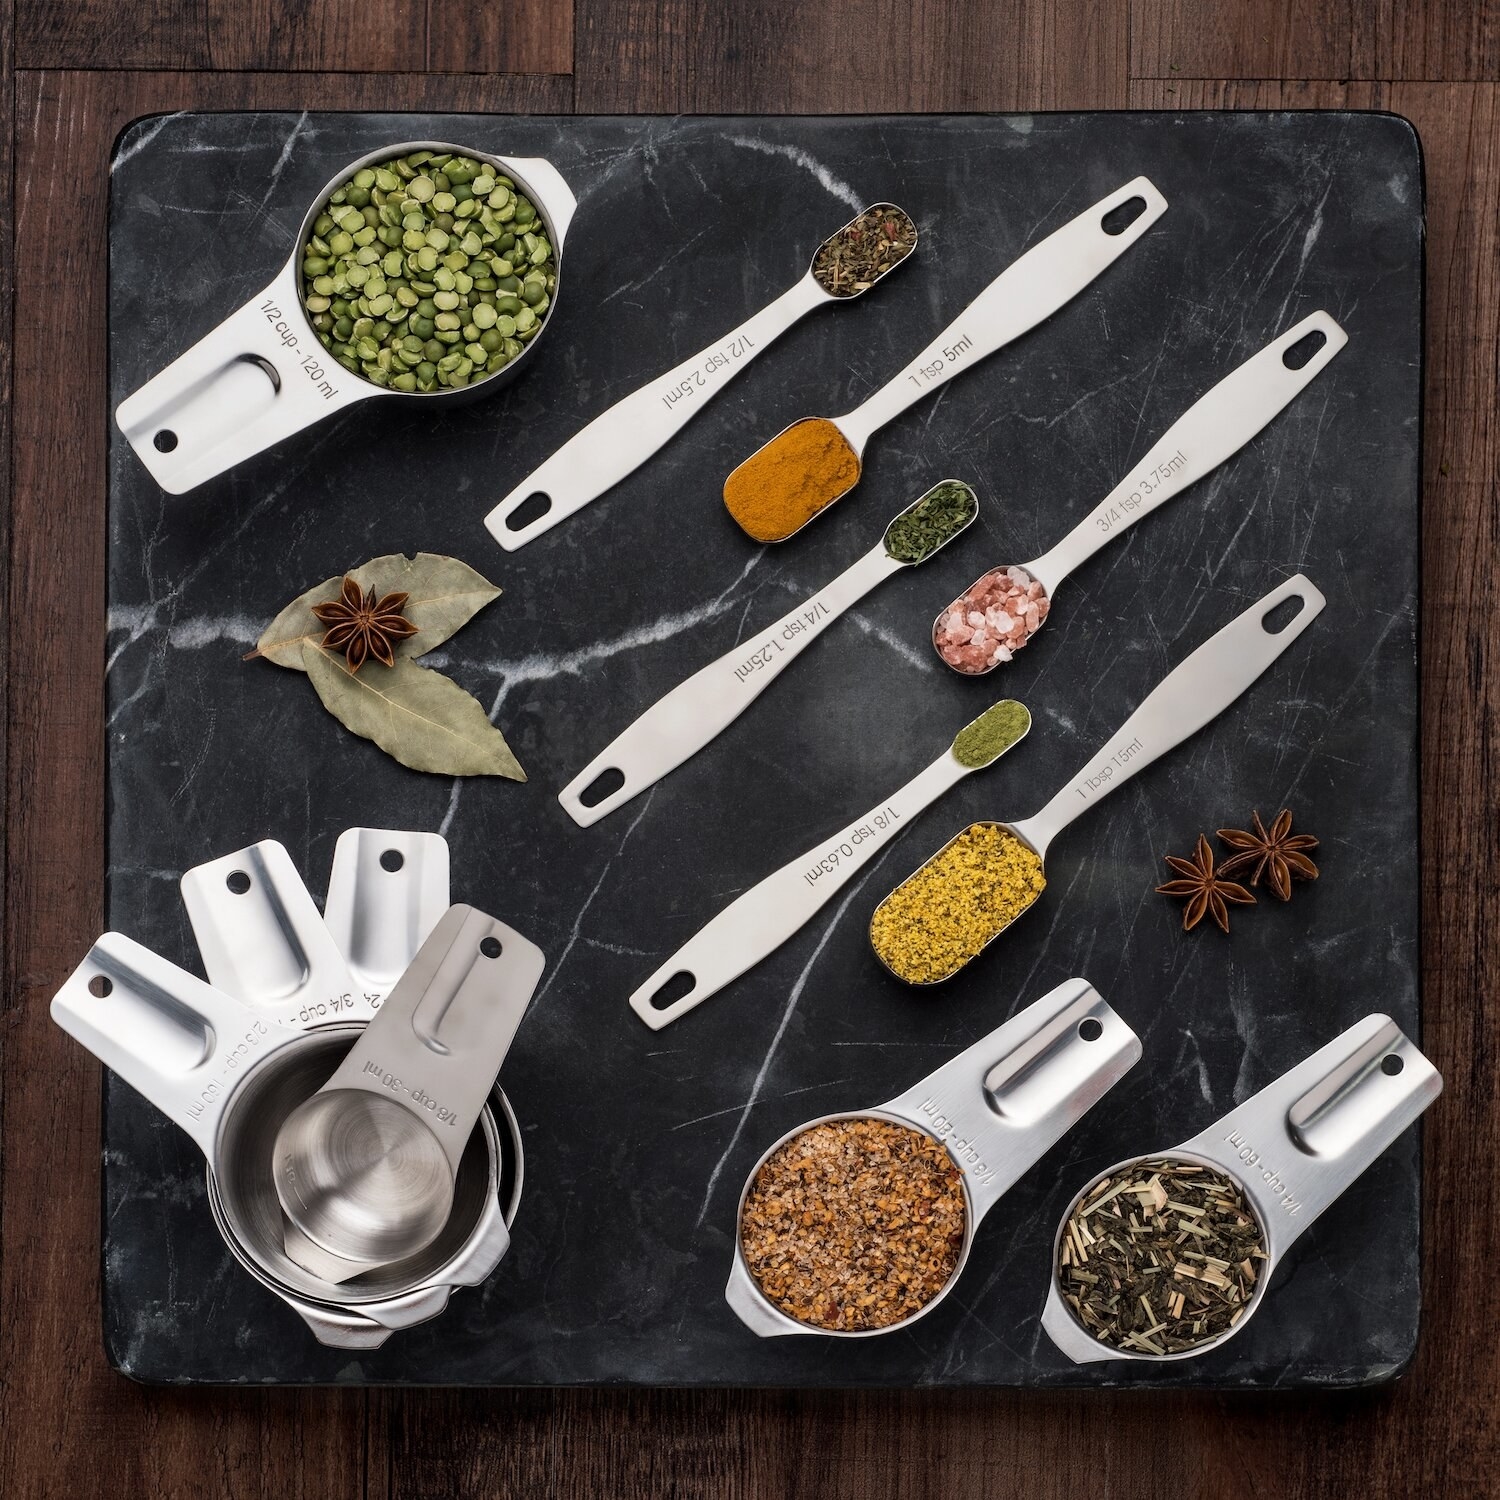 The set with spices inside the spoons